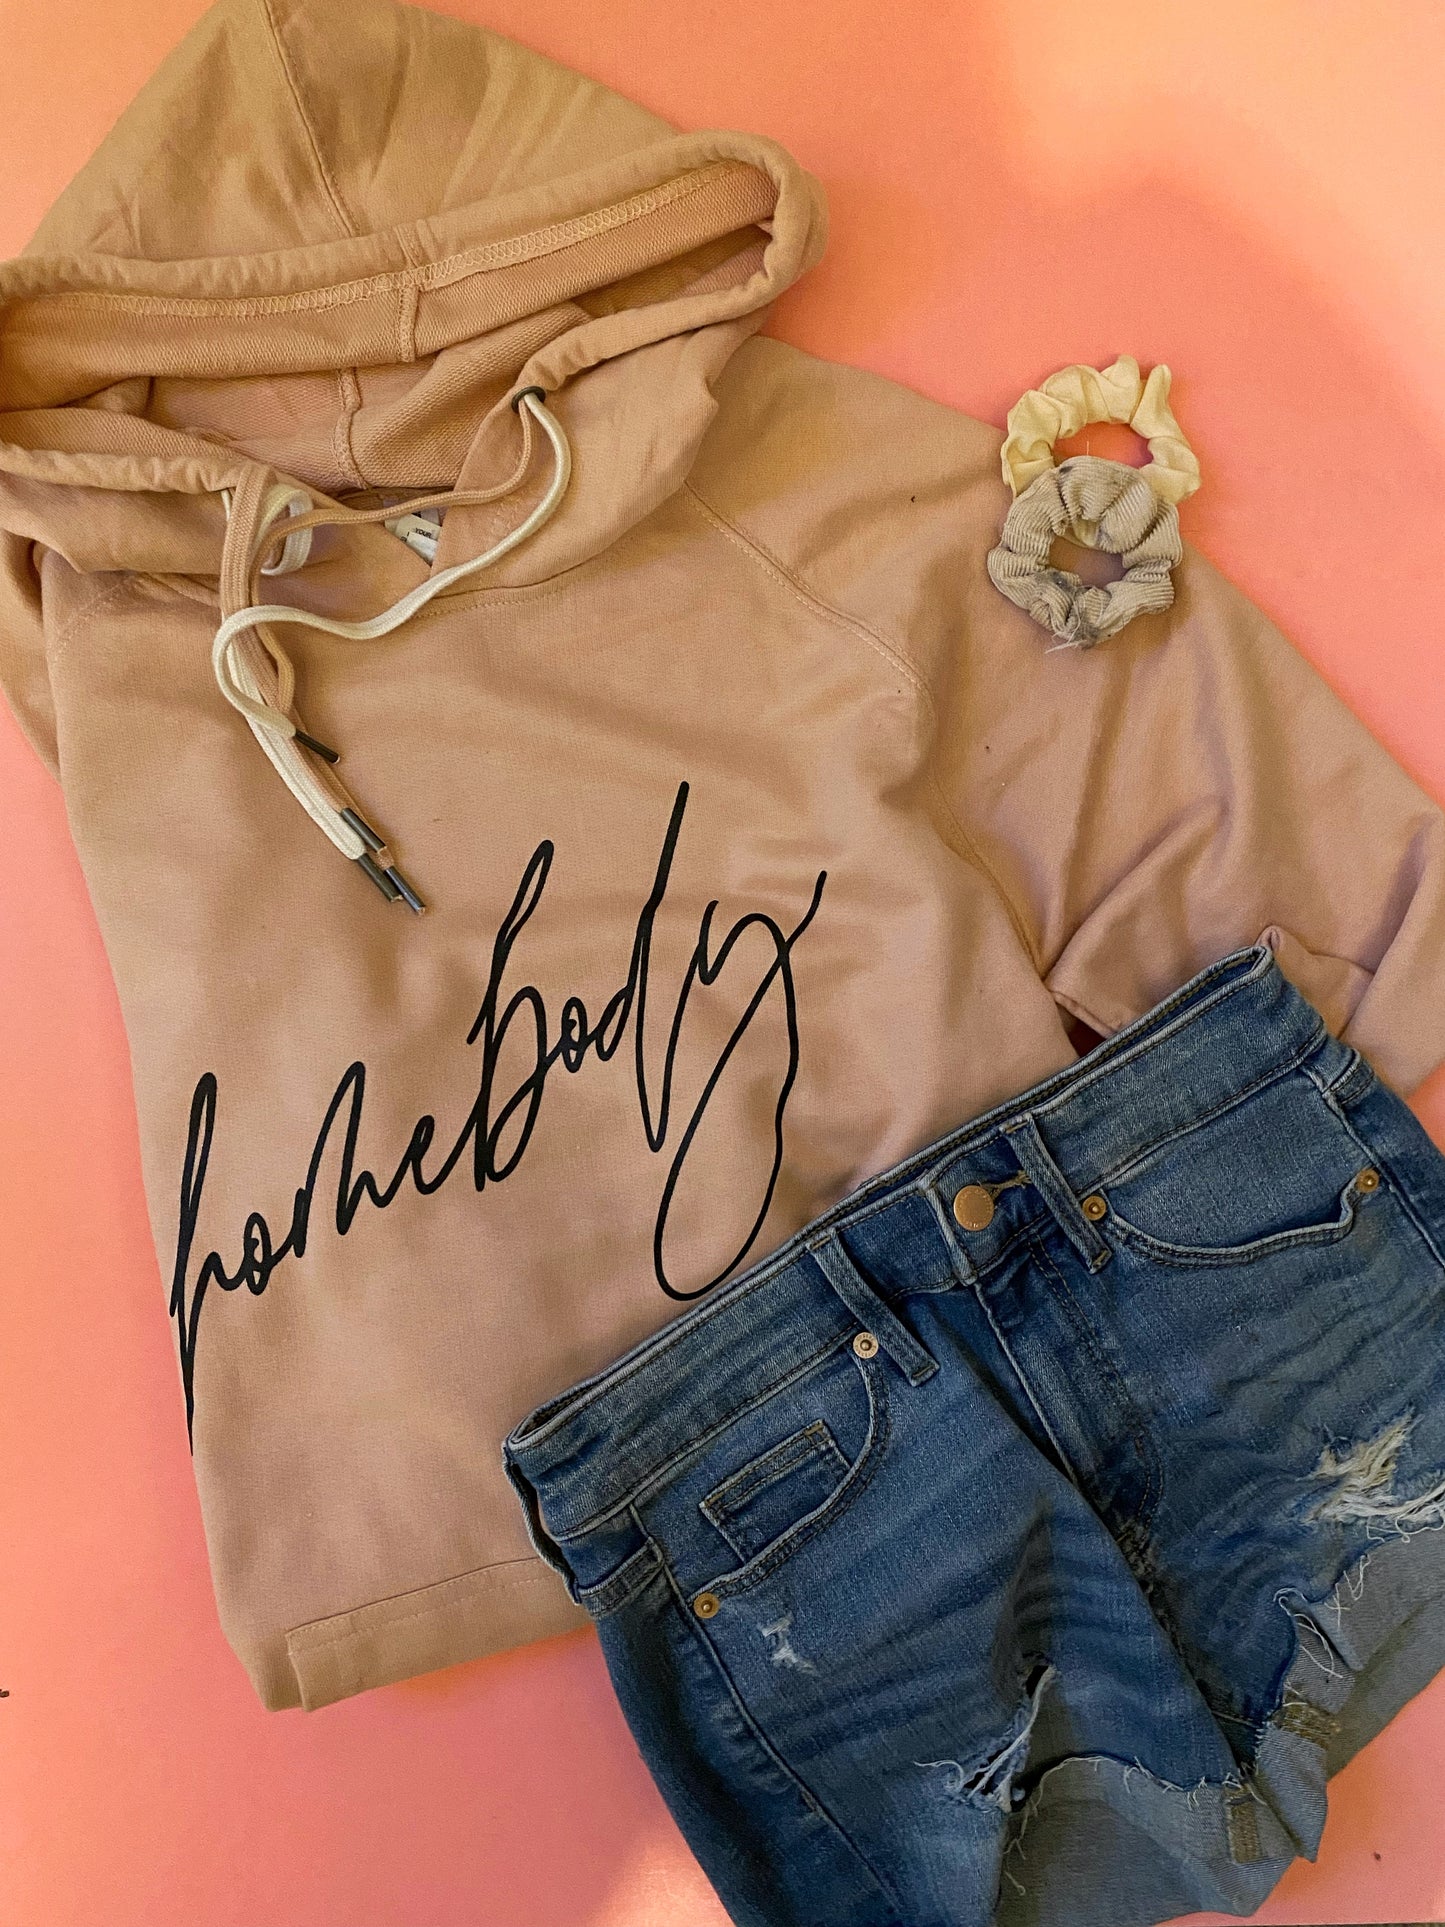 Homebody - Peach French Terry double drawcord sweatshirt